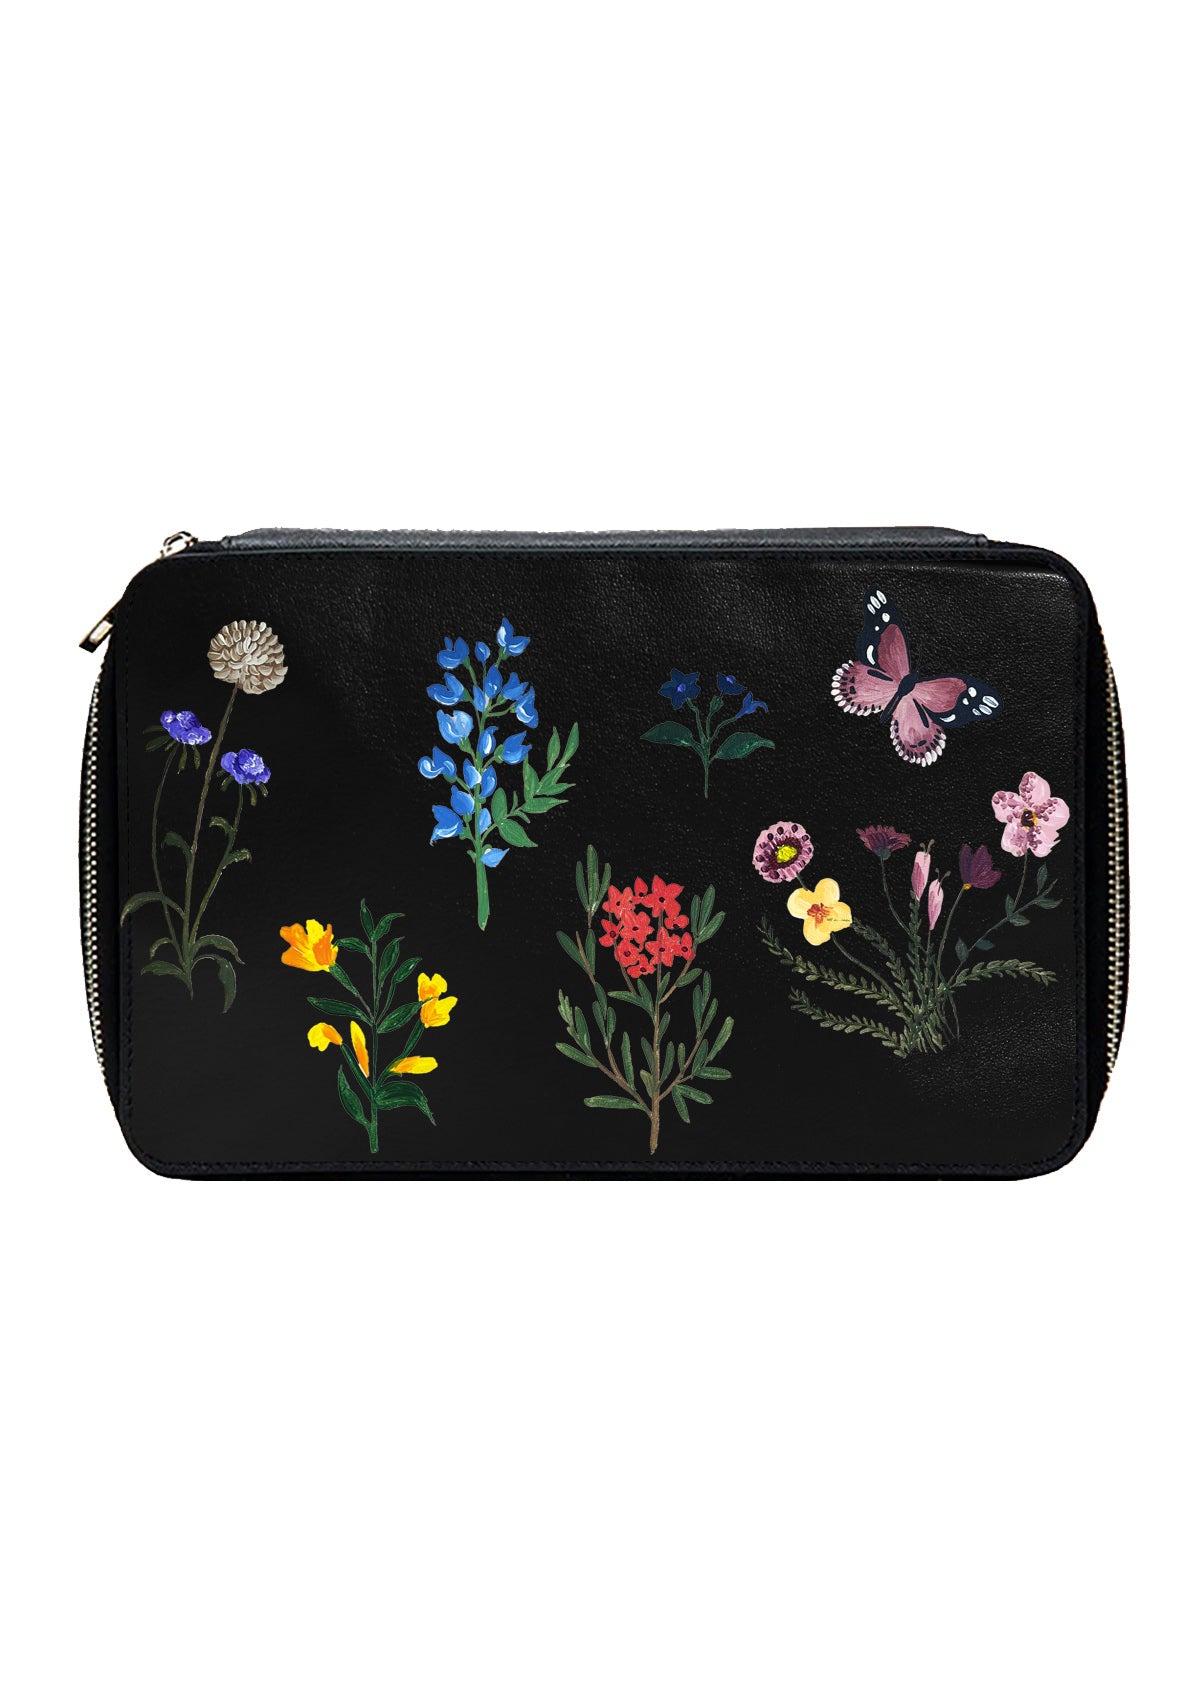 Pressed Flowers Black Pouch